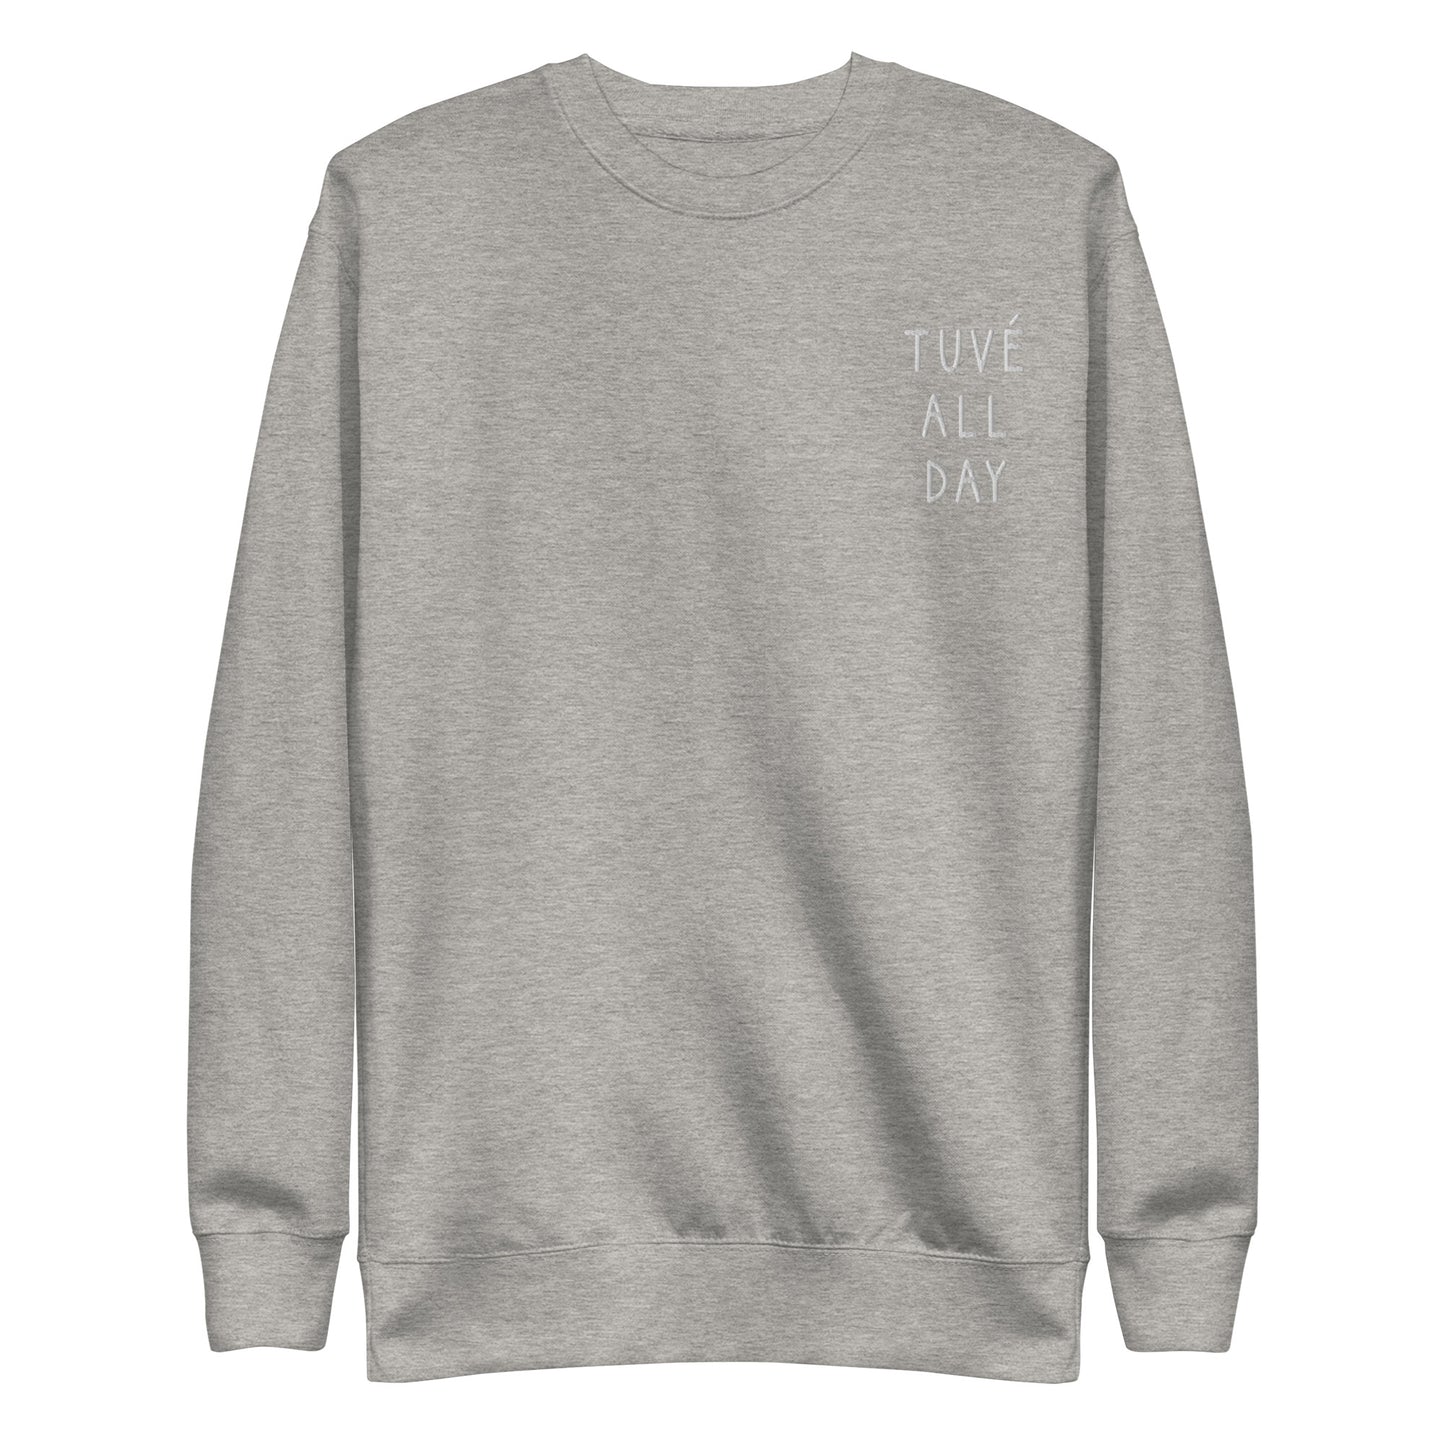 Tuvé All Day Embroidered Premium Sweatshirt